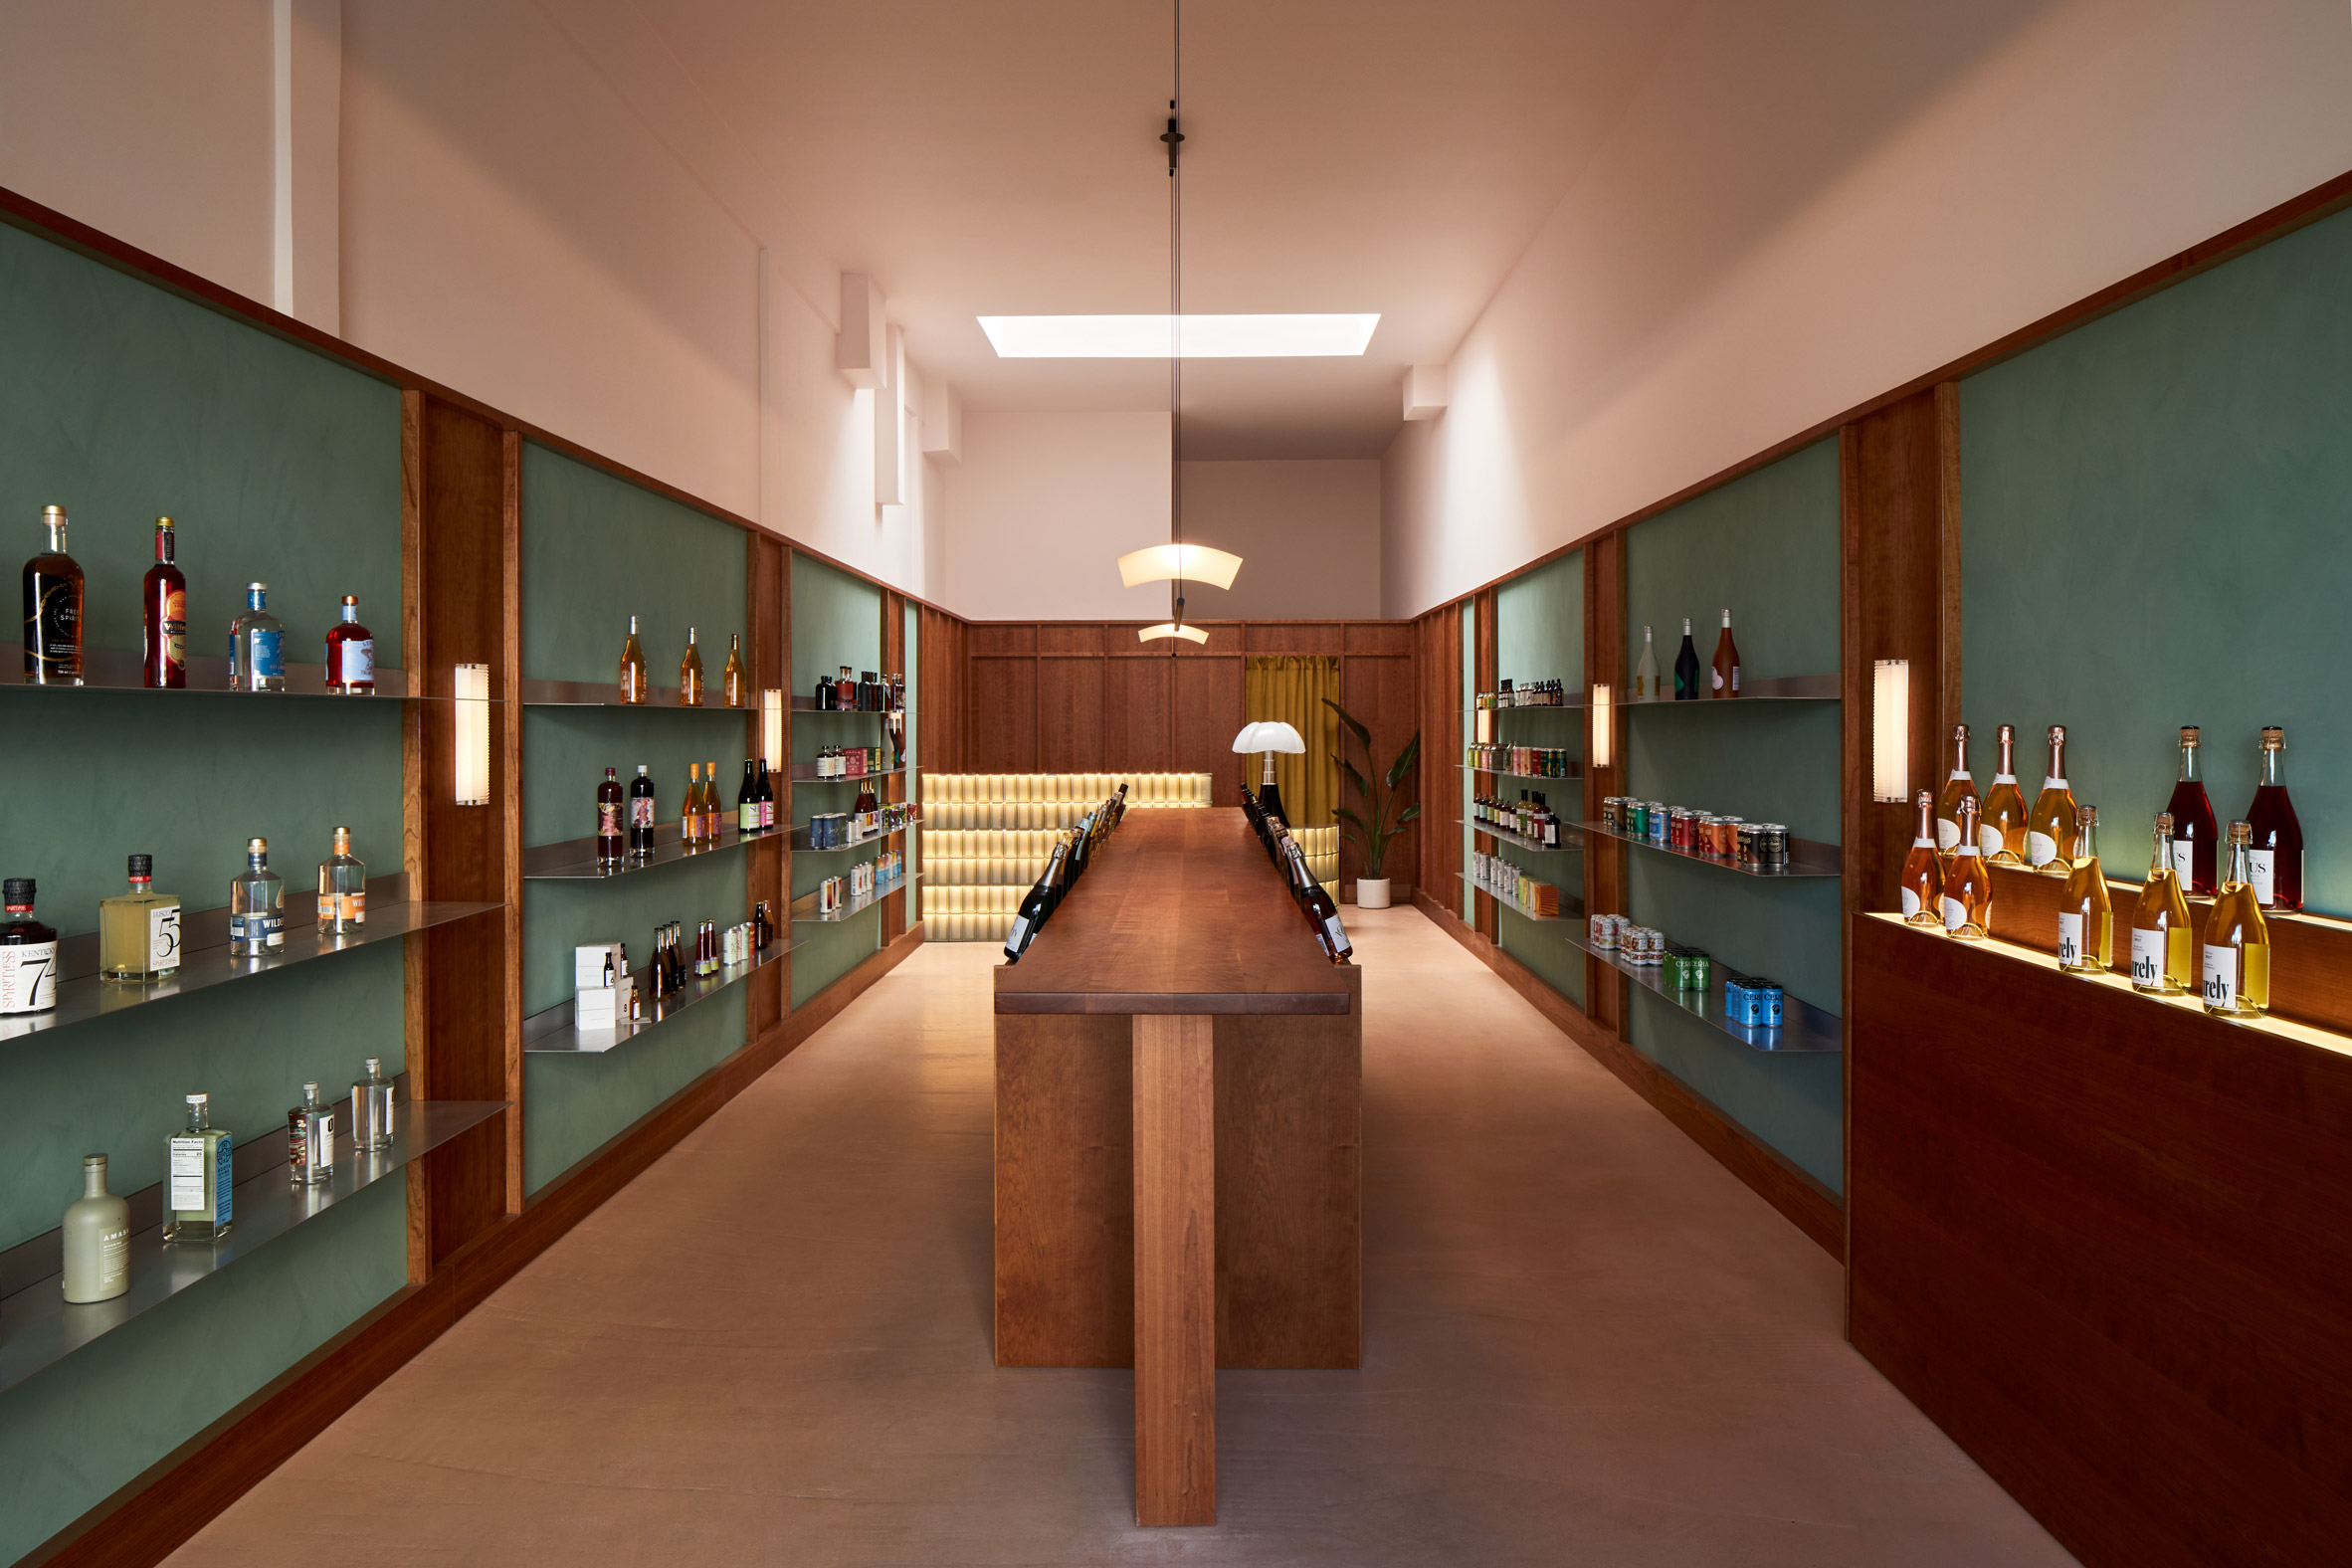 Bottle shop with central wooden counter and displays on either side